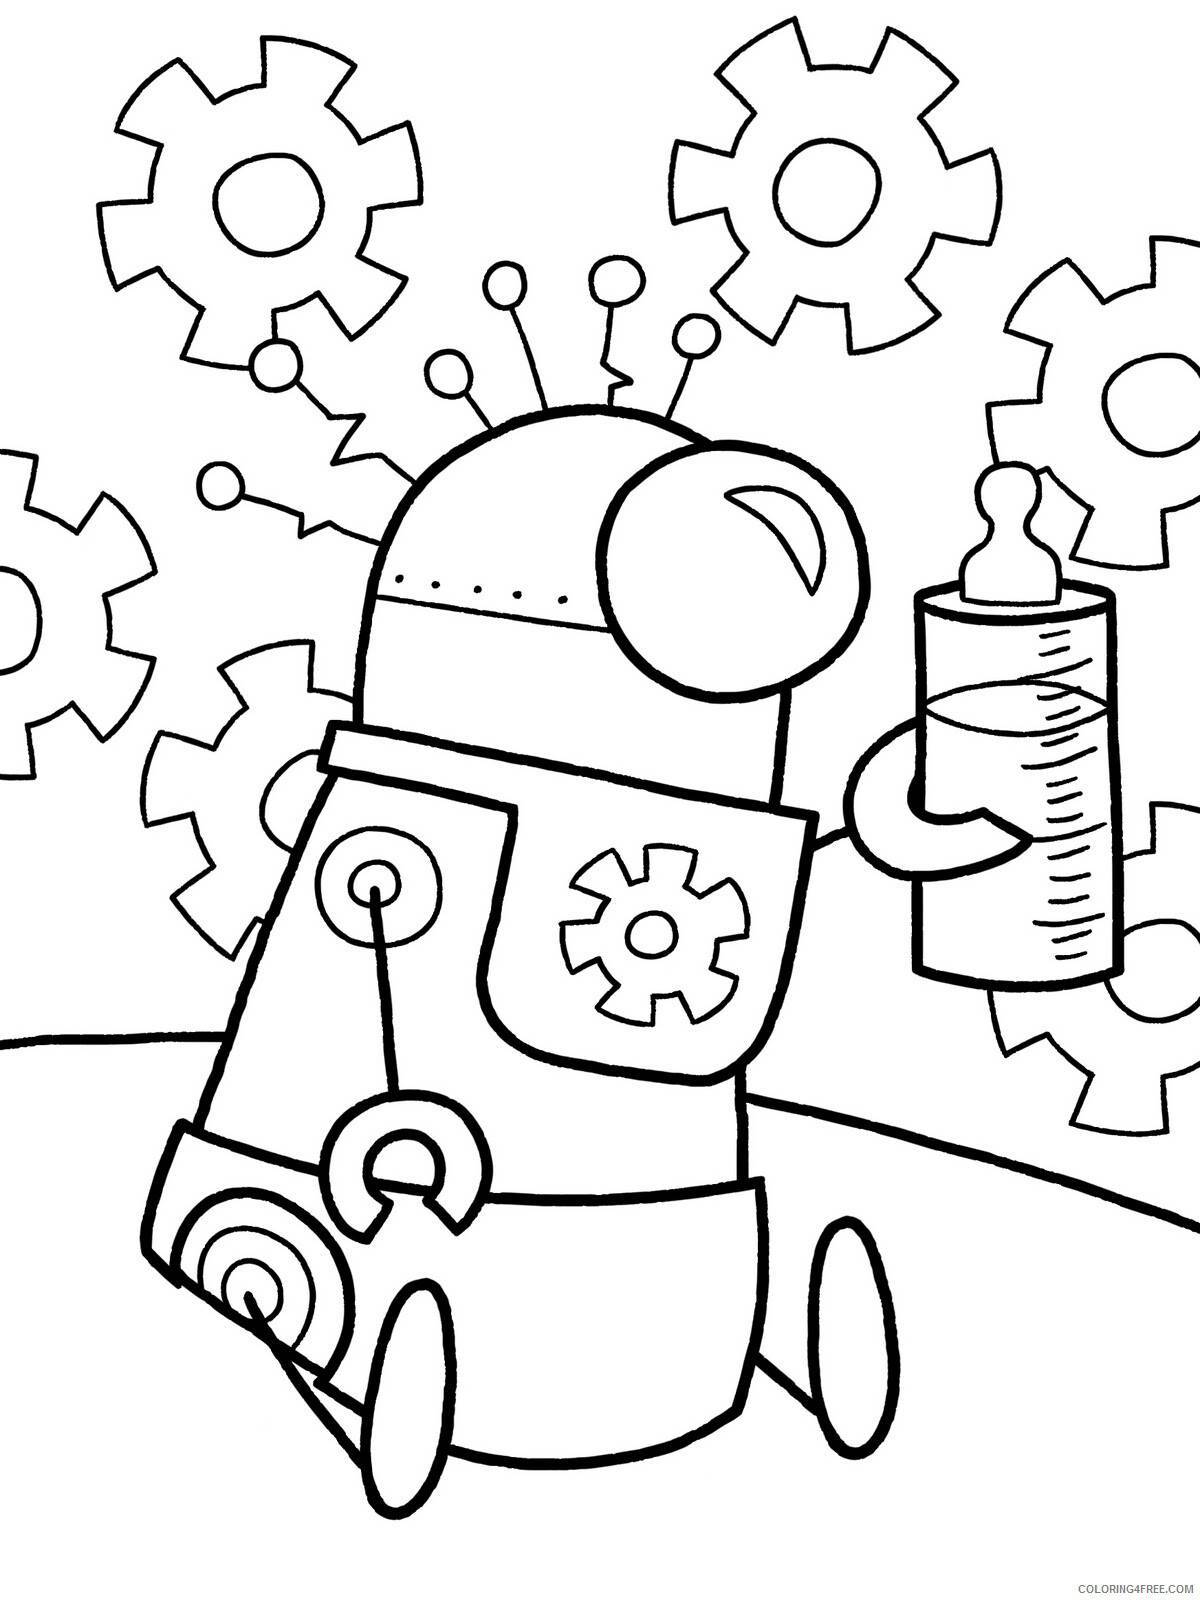 Adorable robot coloring book for 3-4 year olds